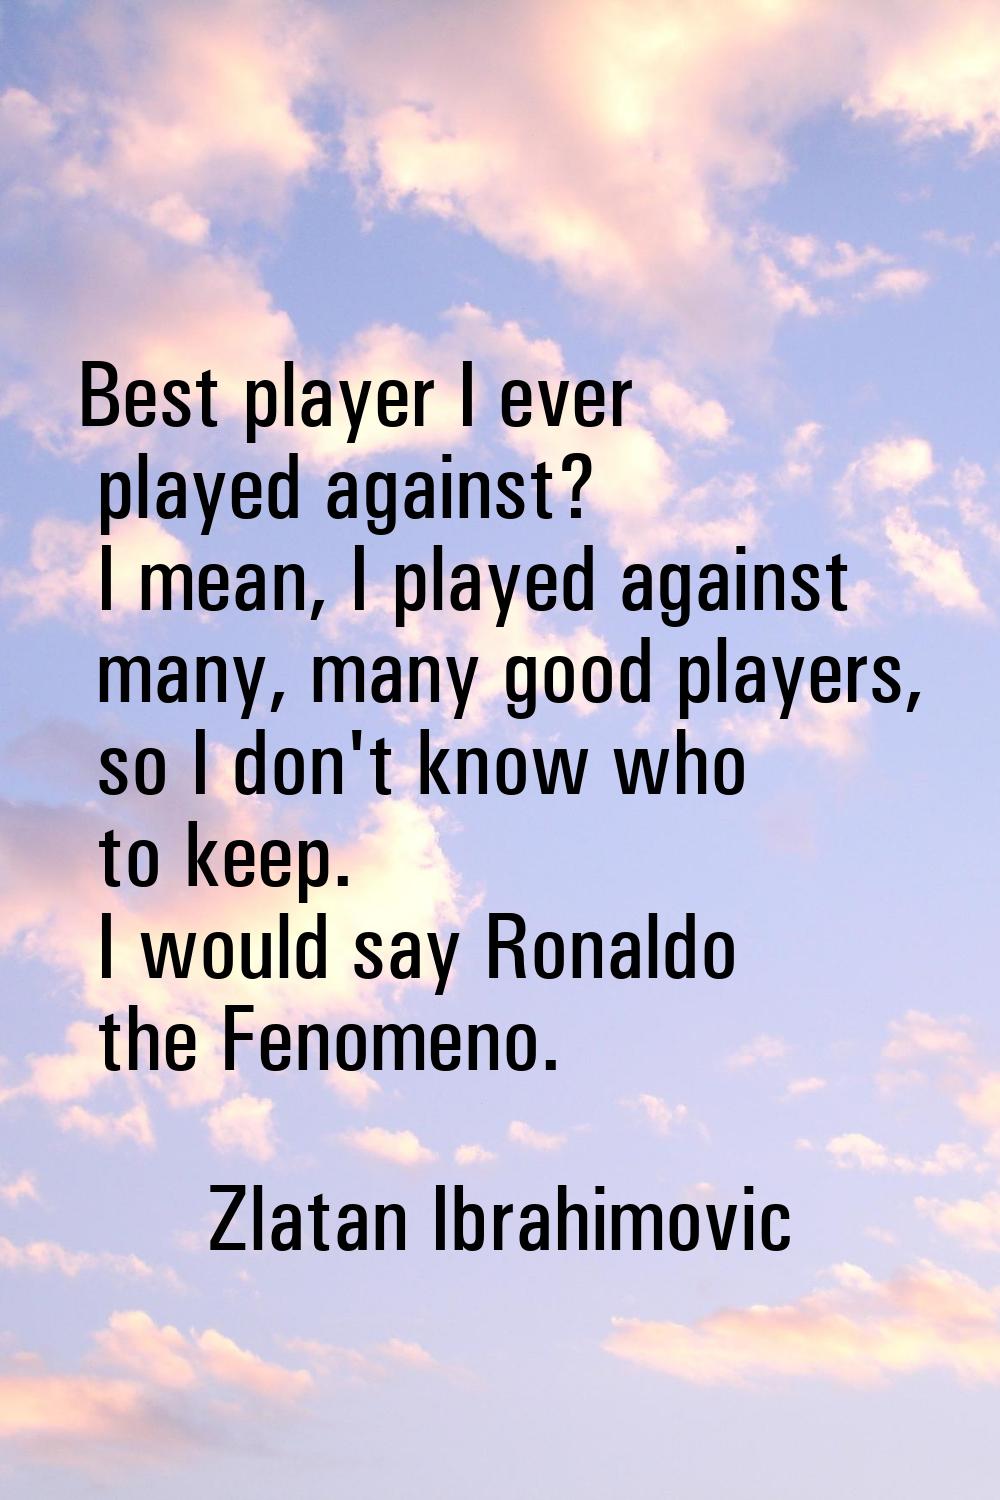 Best player I ever played against? I mean, I played against many, many good players, so I don't kno